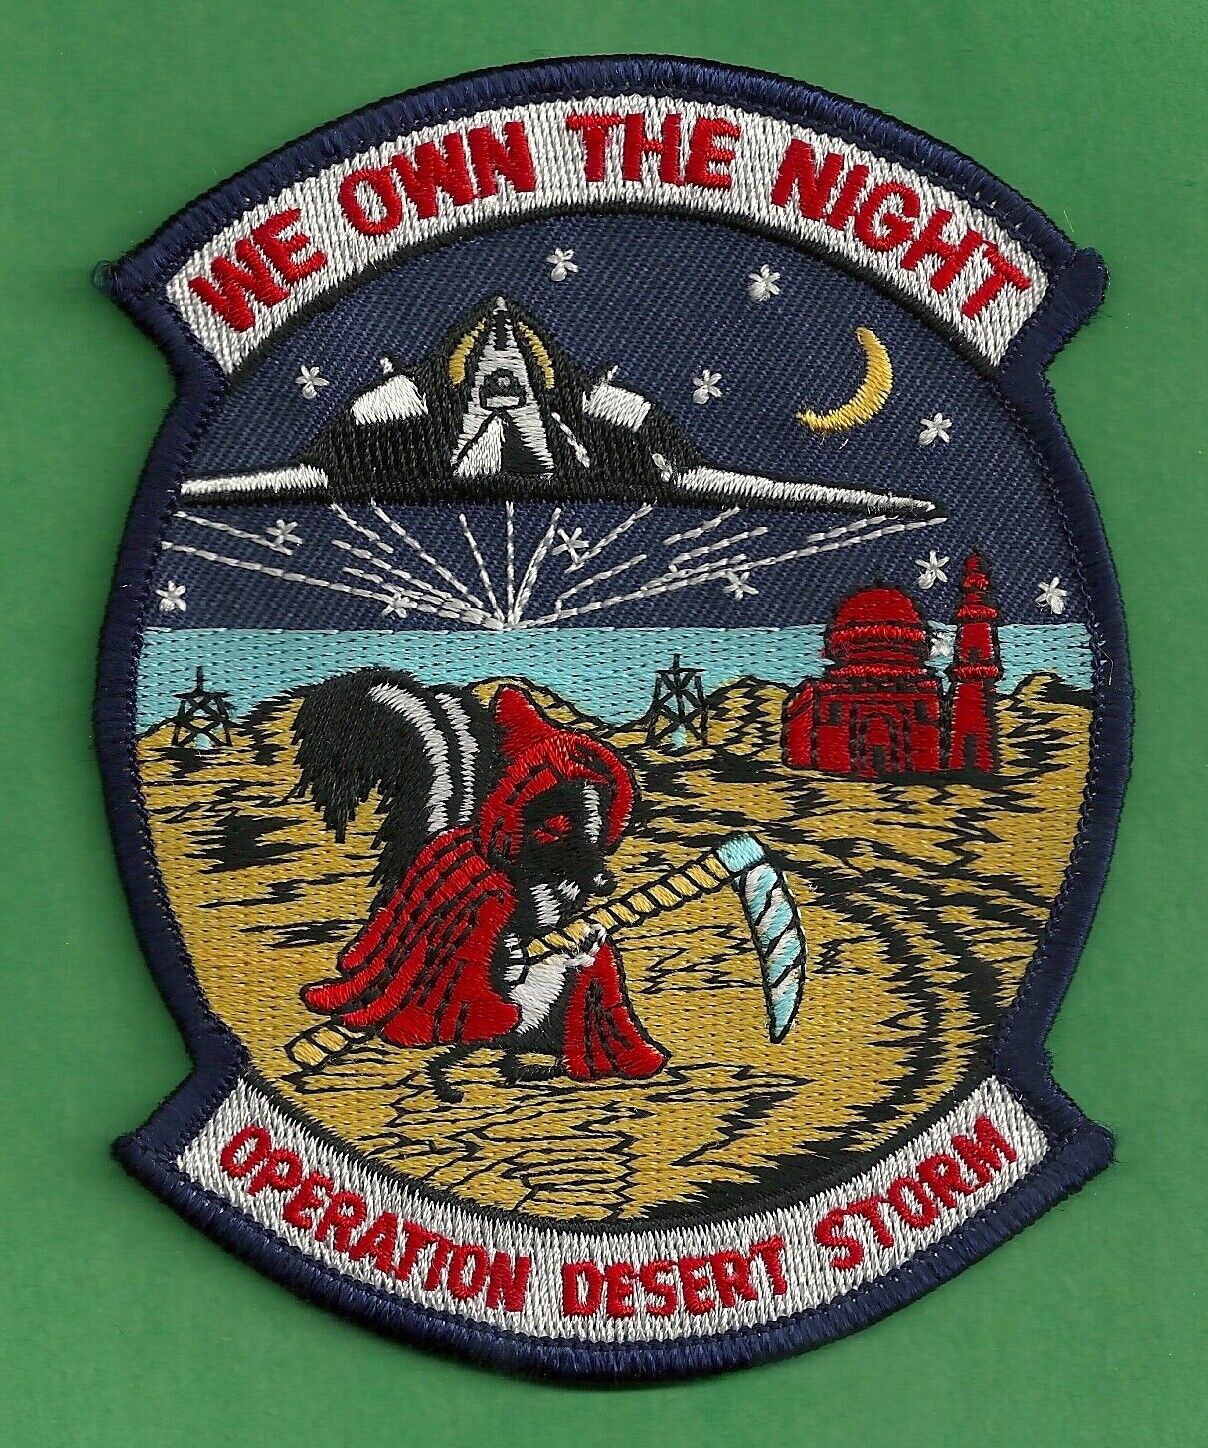 OPERATION DESERT STORM F-117A MILITARY AIRCRAFT PATCH WE OWN THE NIGHT